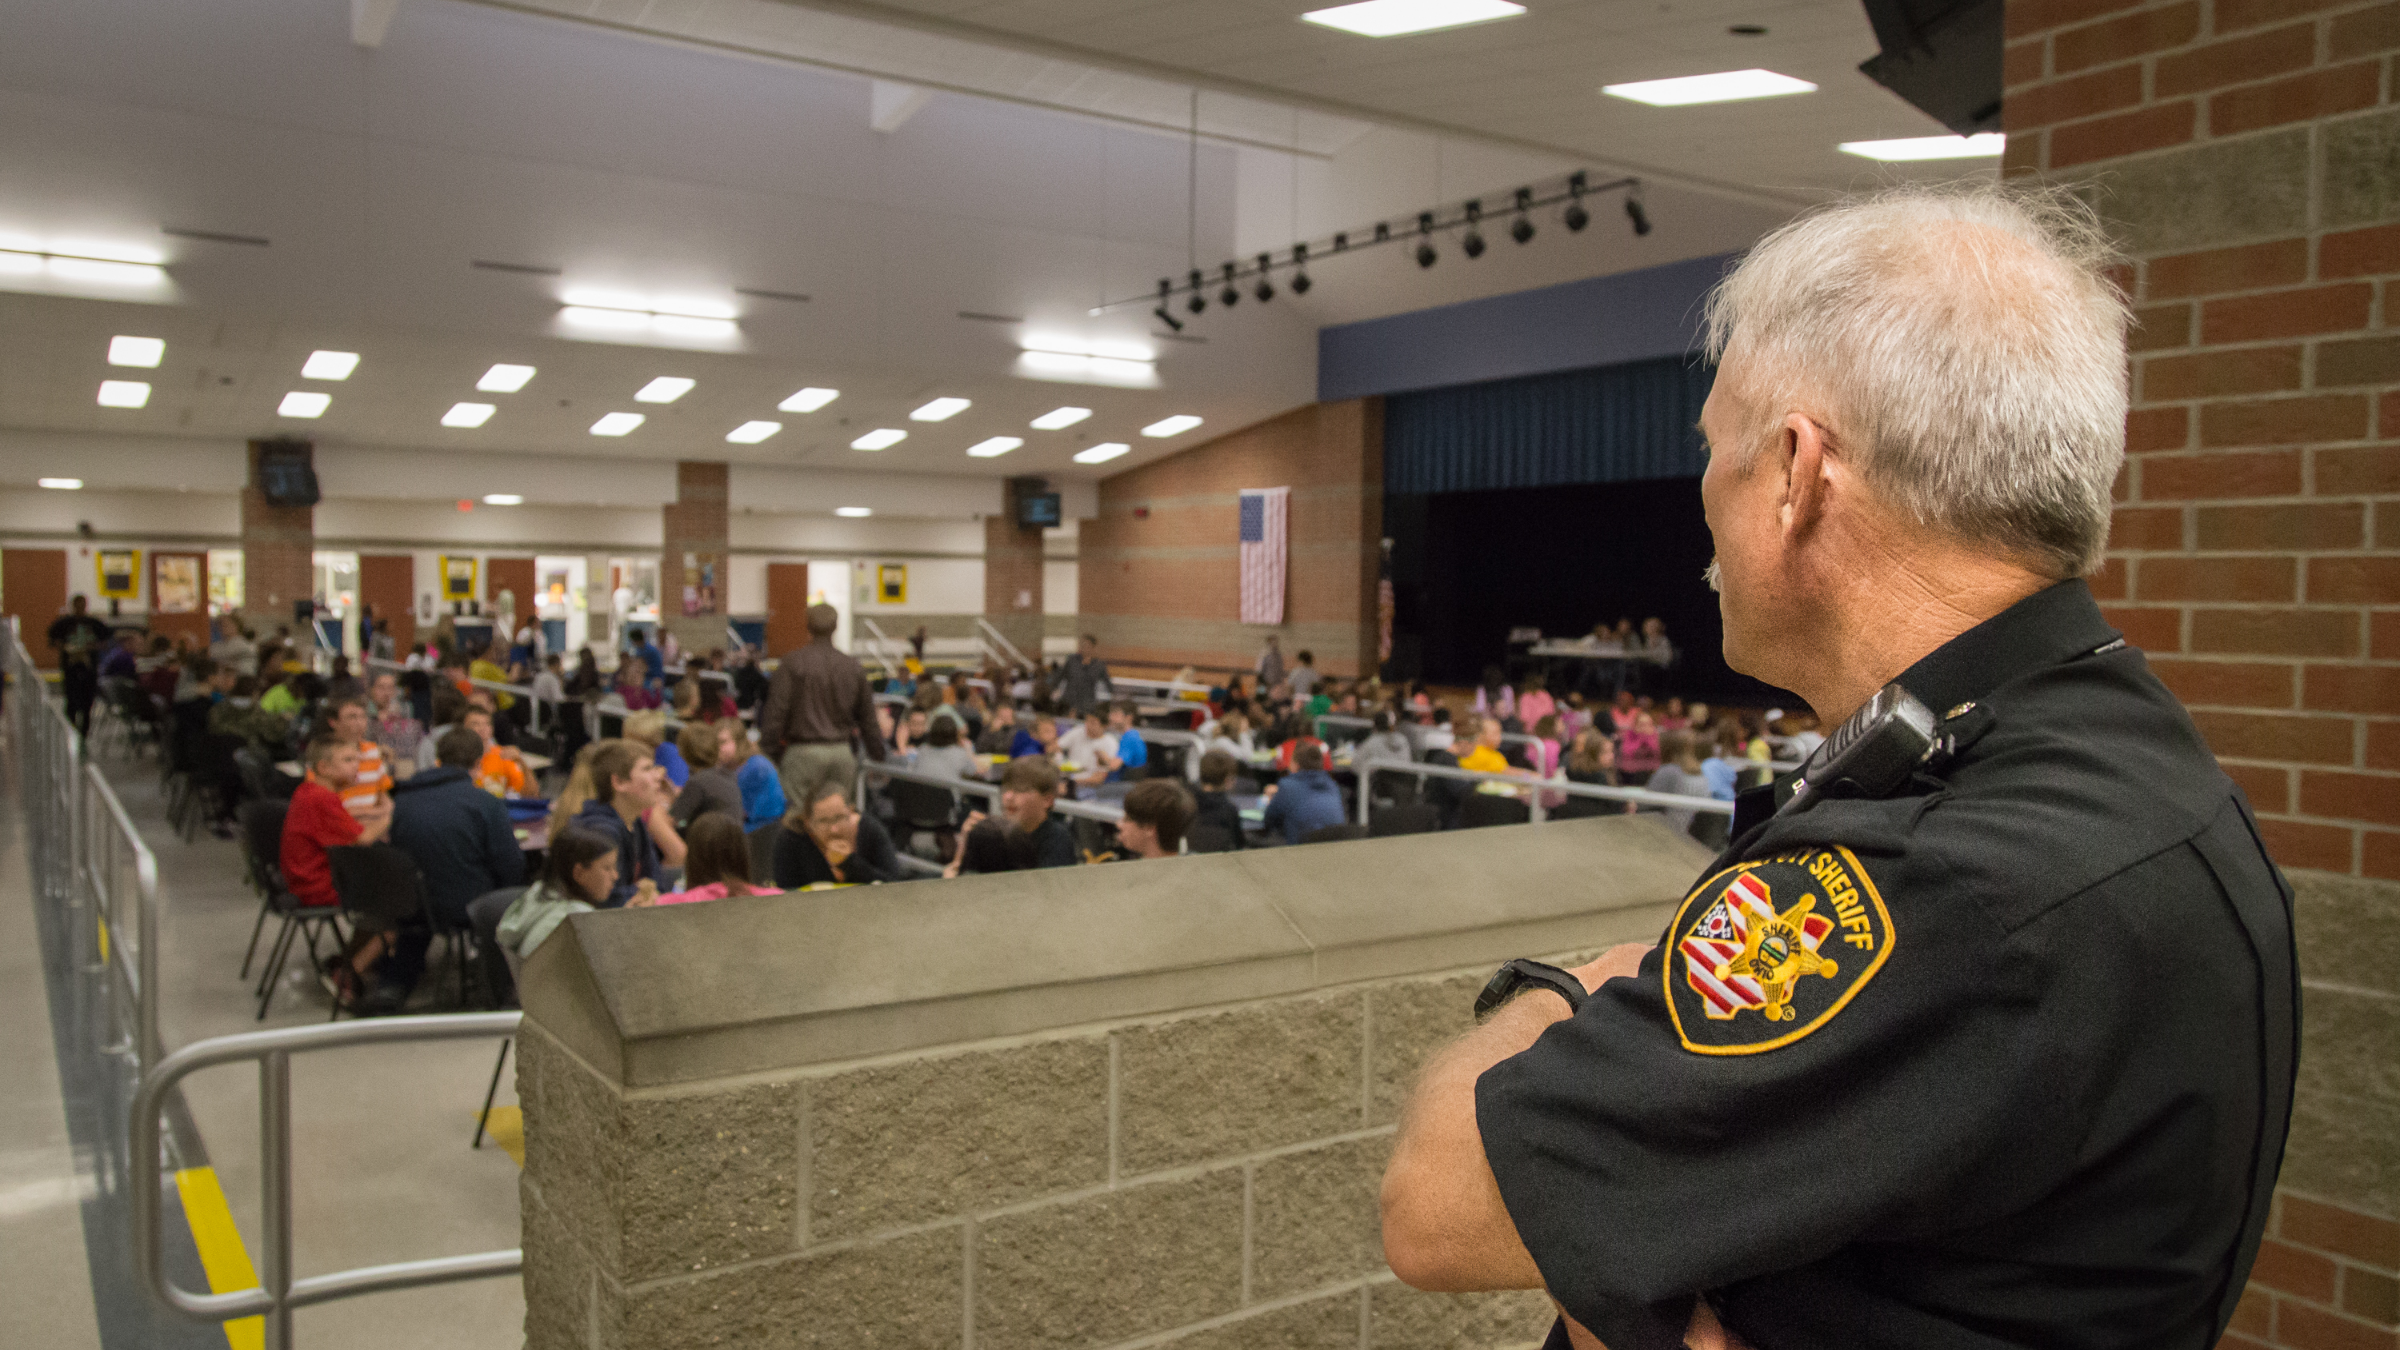 Increasing Security in Schools: Our Community Can Do Better in 2023